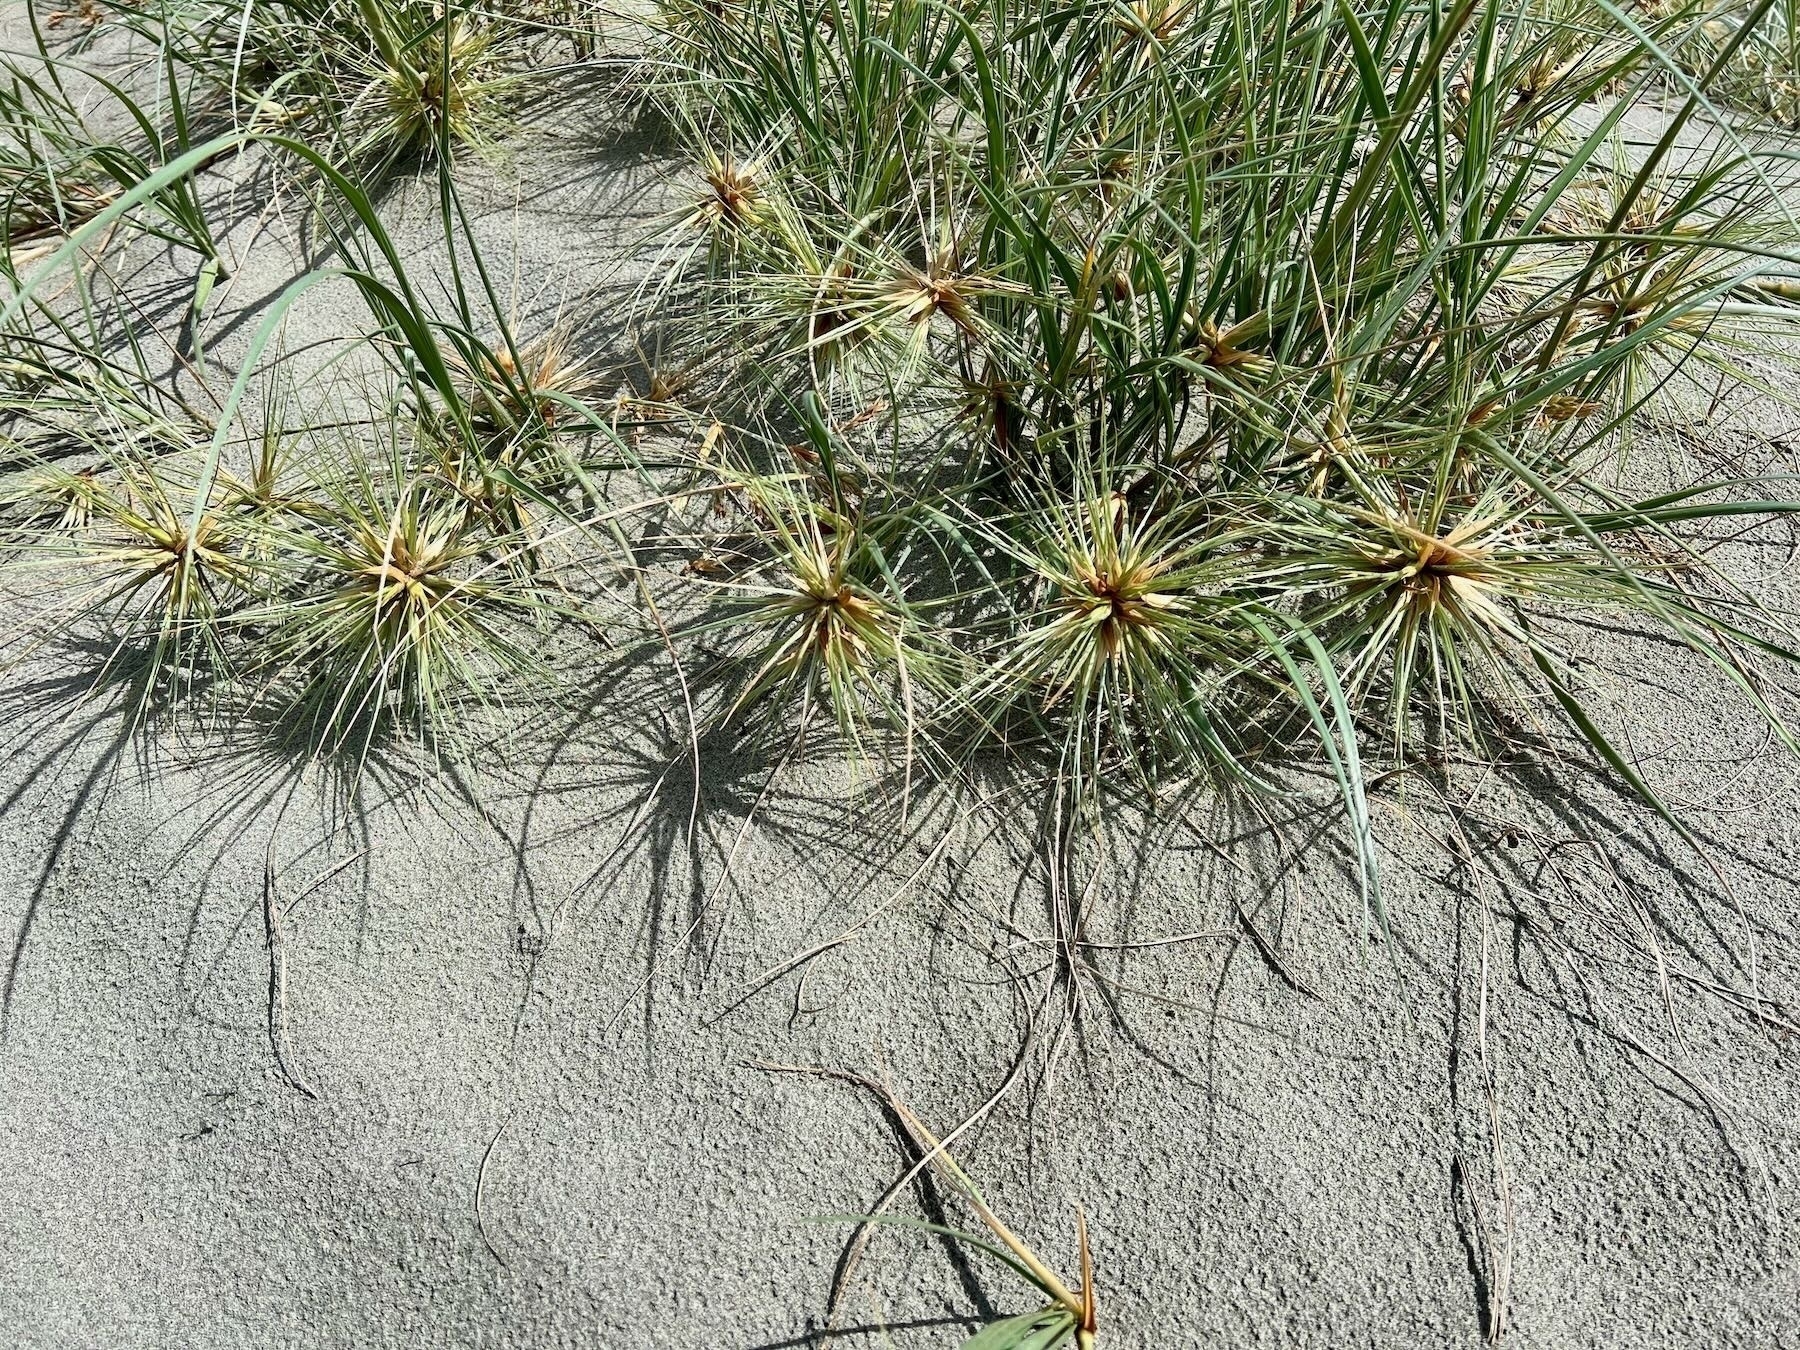 A line of seedheads on a runner.